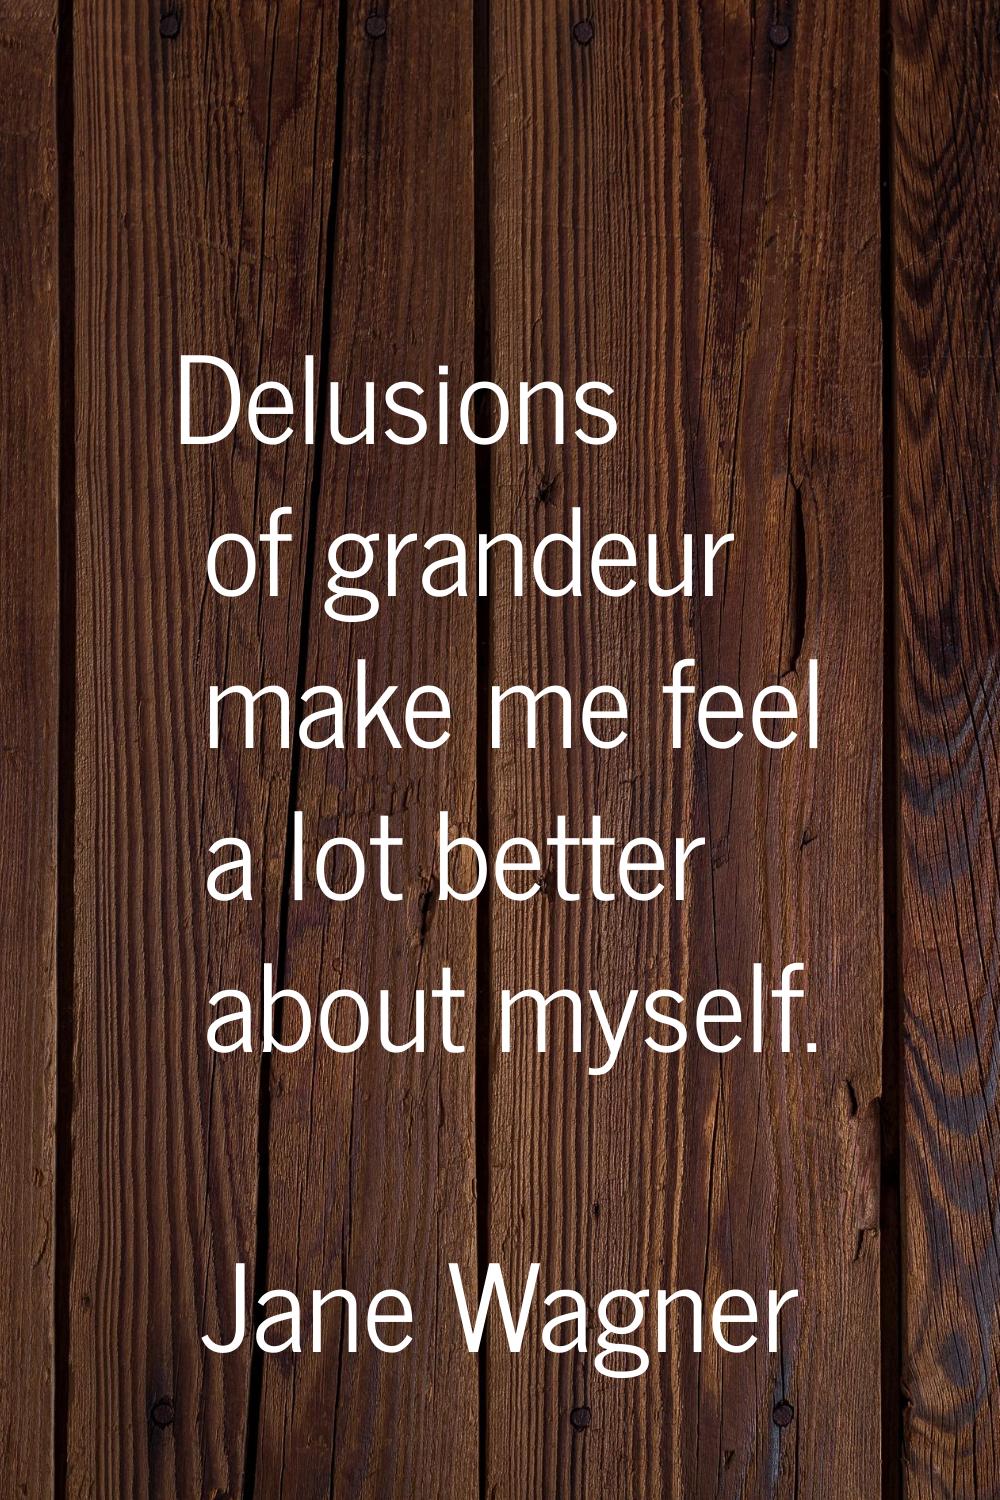 Delusions of grandeur make me feel a lot better about myself.